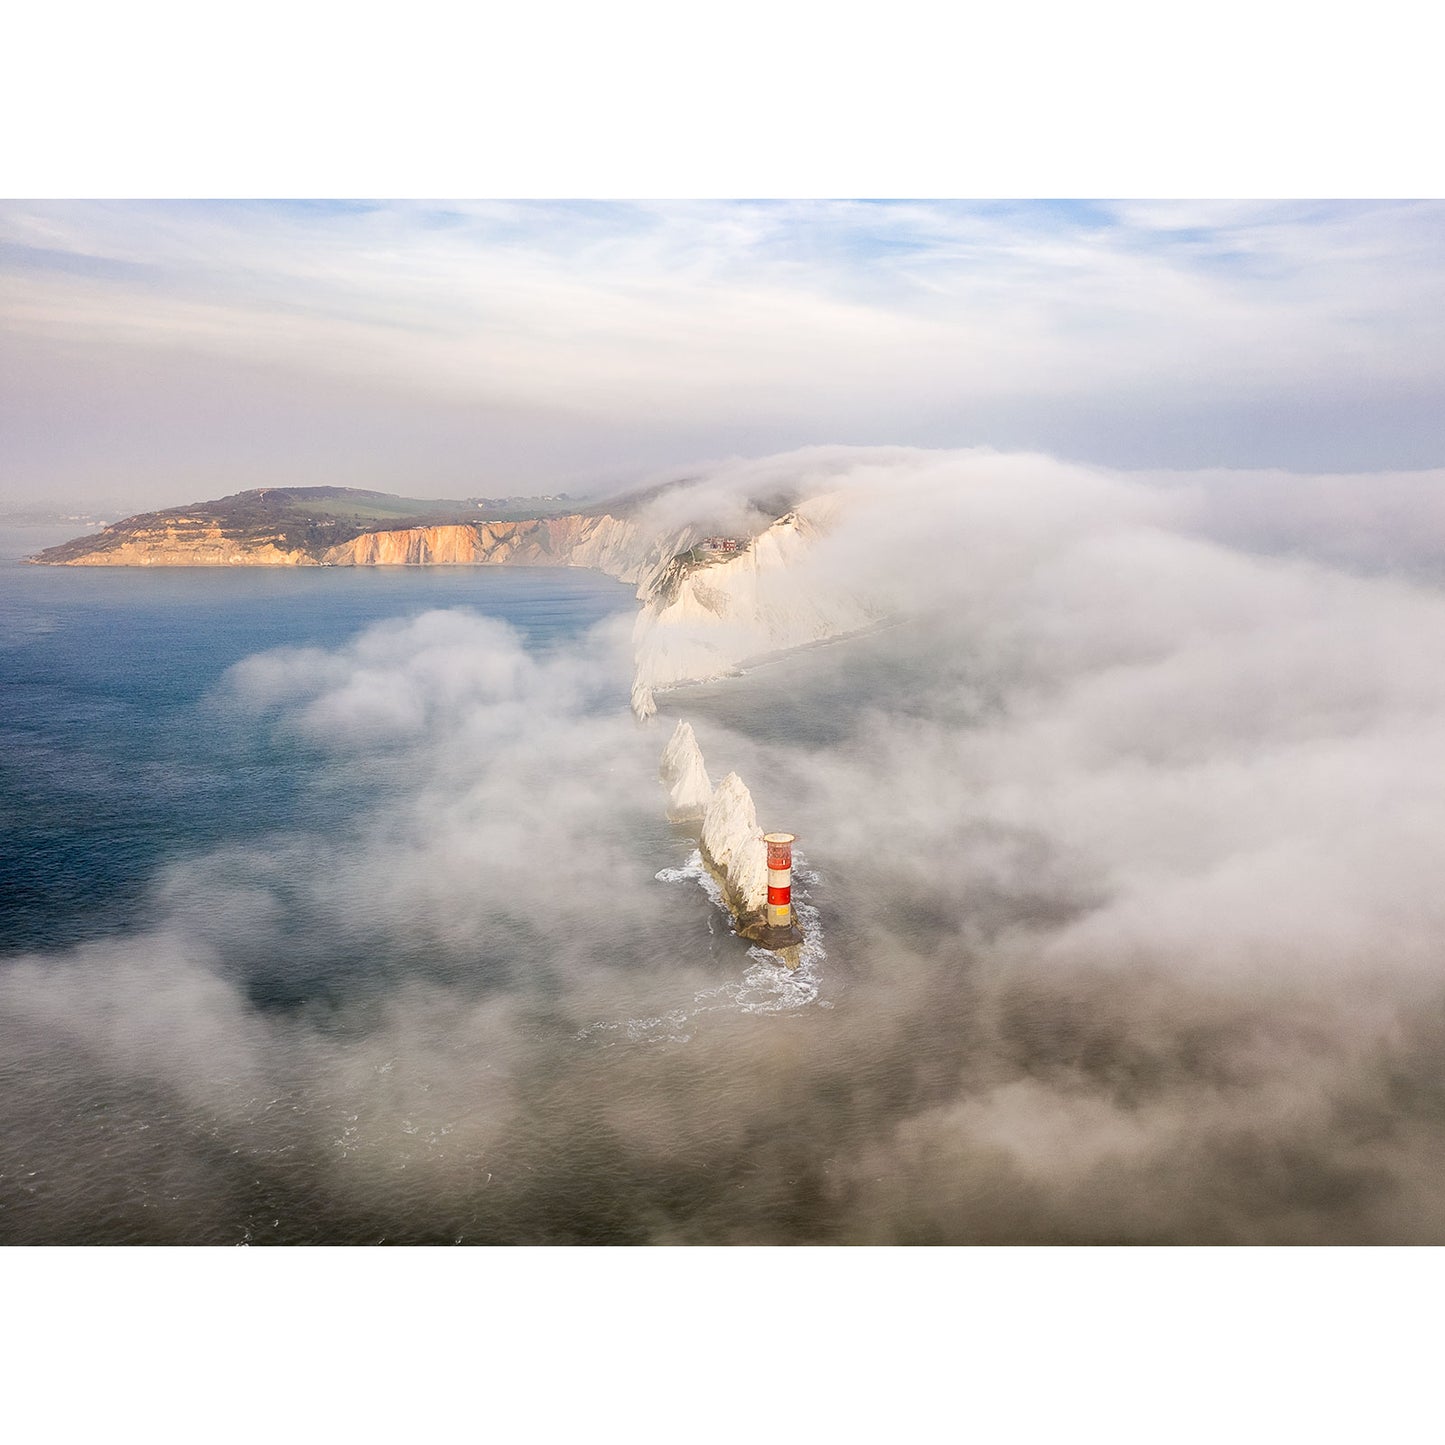 Fog over The Needles engulfed by sea fog with towering cliffs on the Isle of Wight in the background. Shot by Available Light Photography.